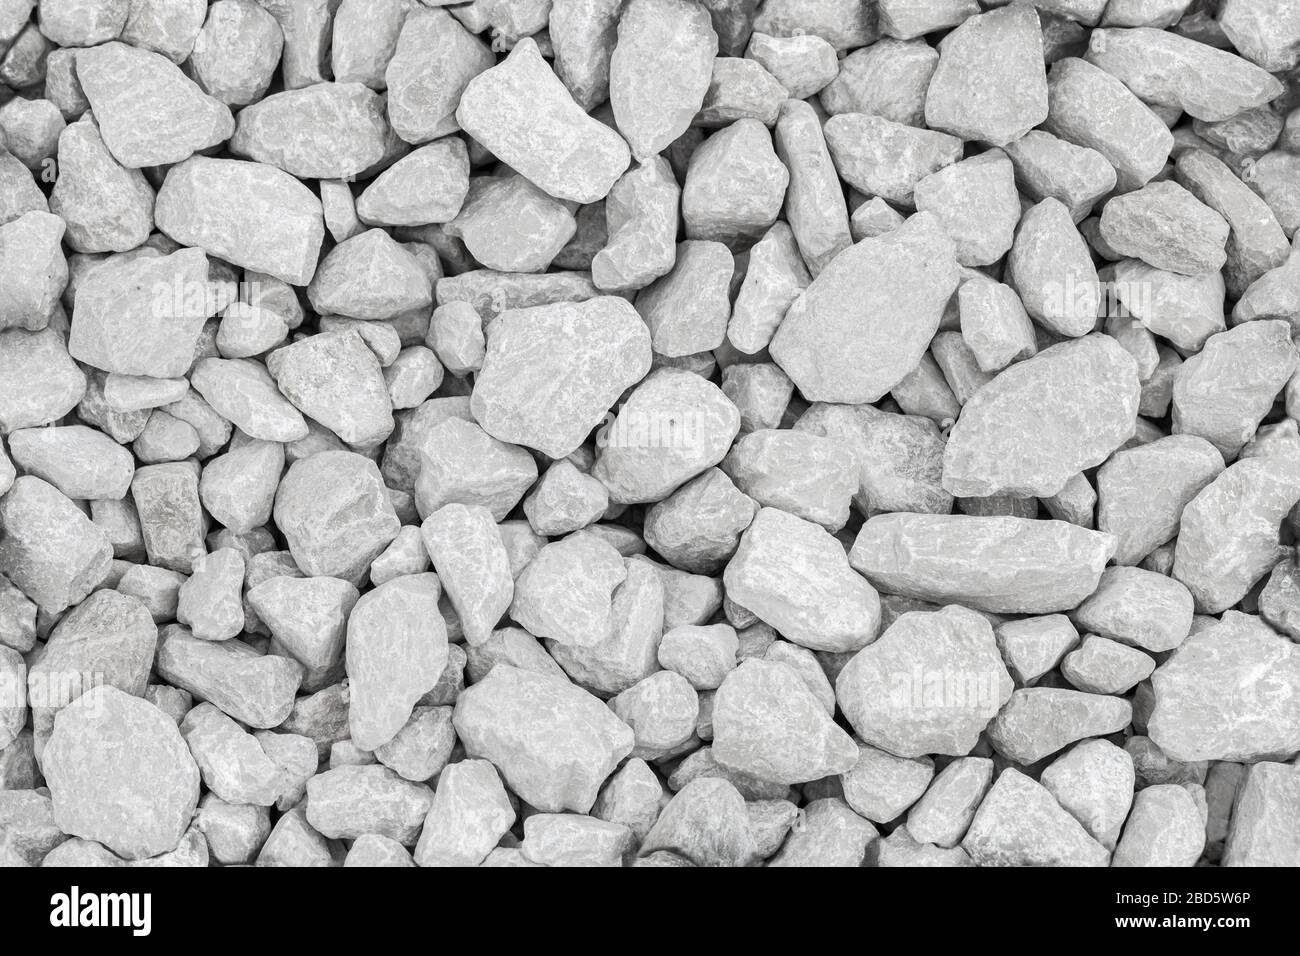 Dusty white industrial gravel on the ground, seamless background photo texture Stock Photo